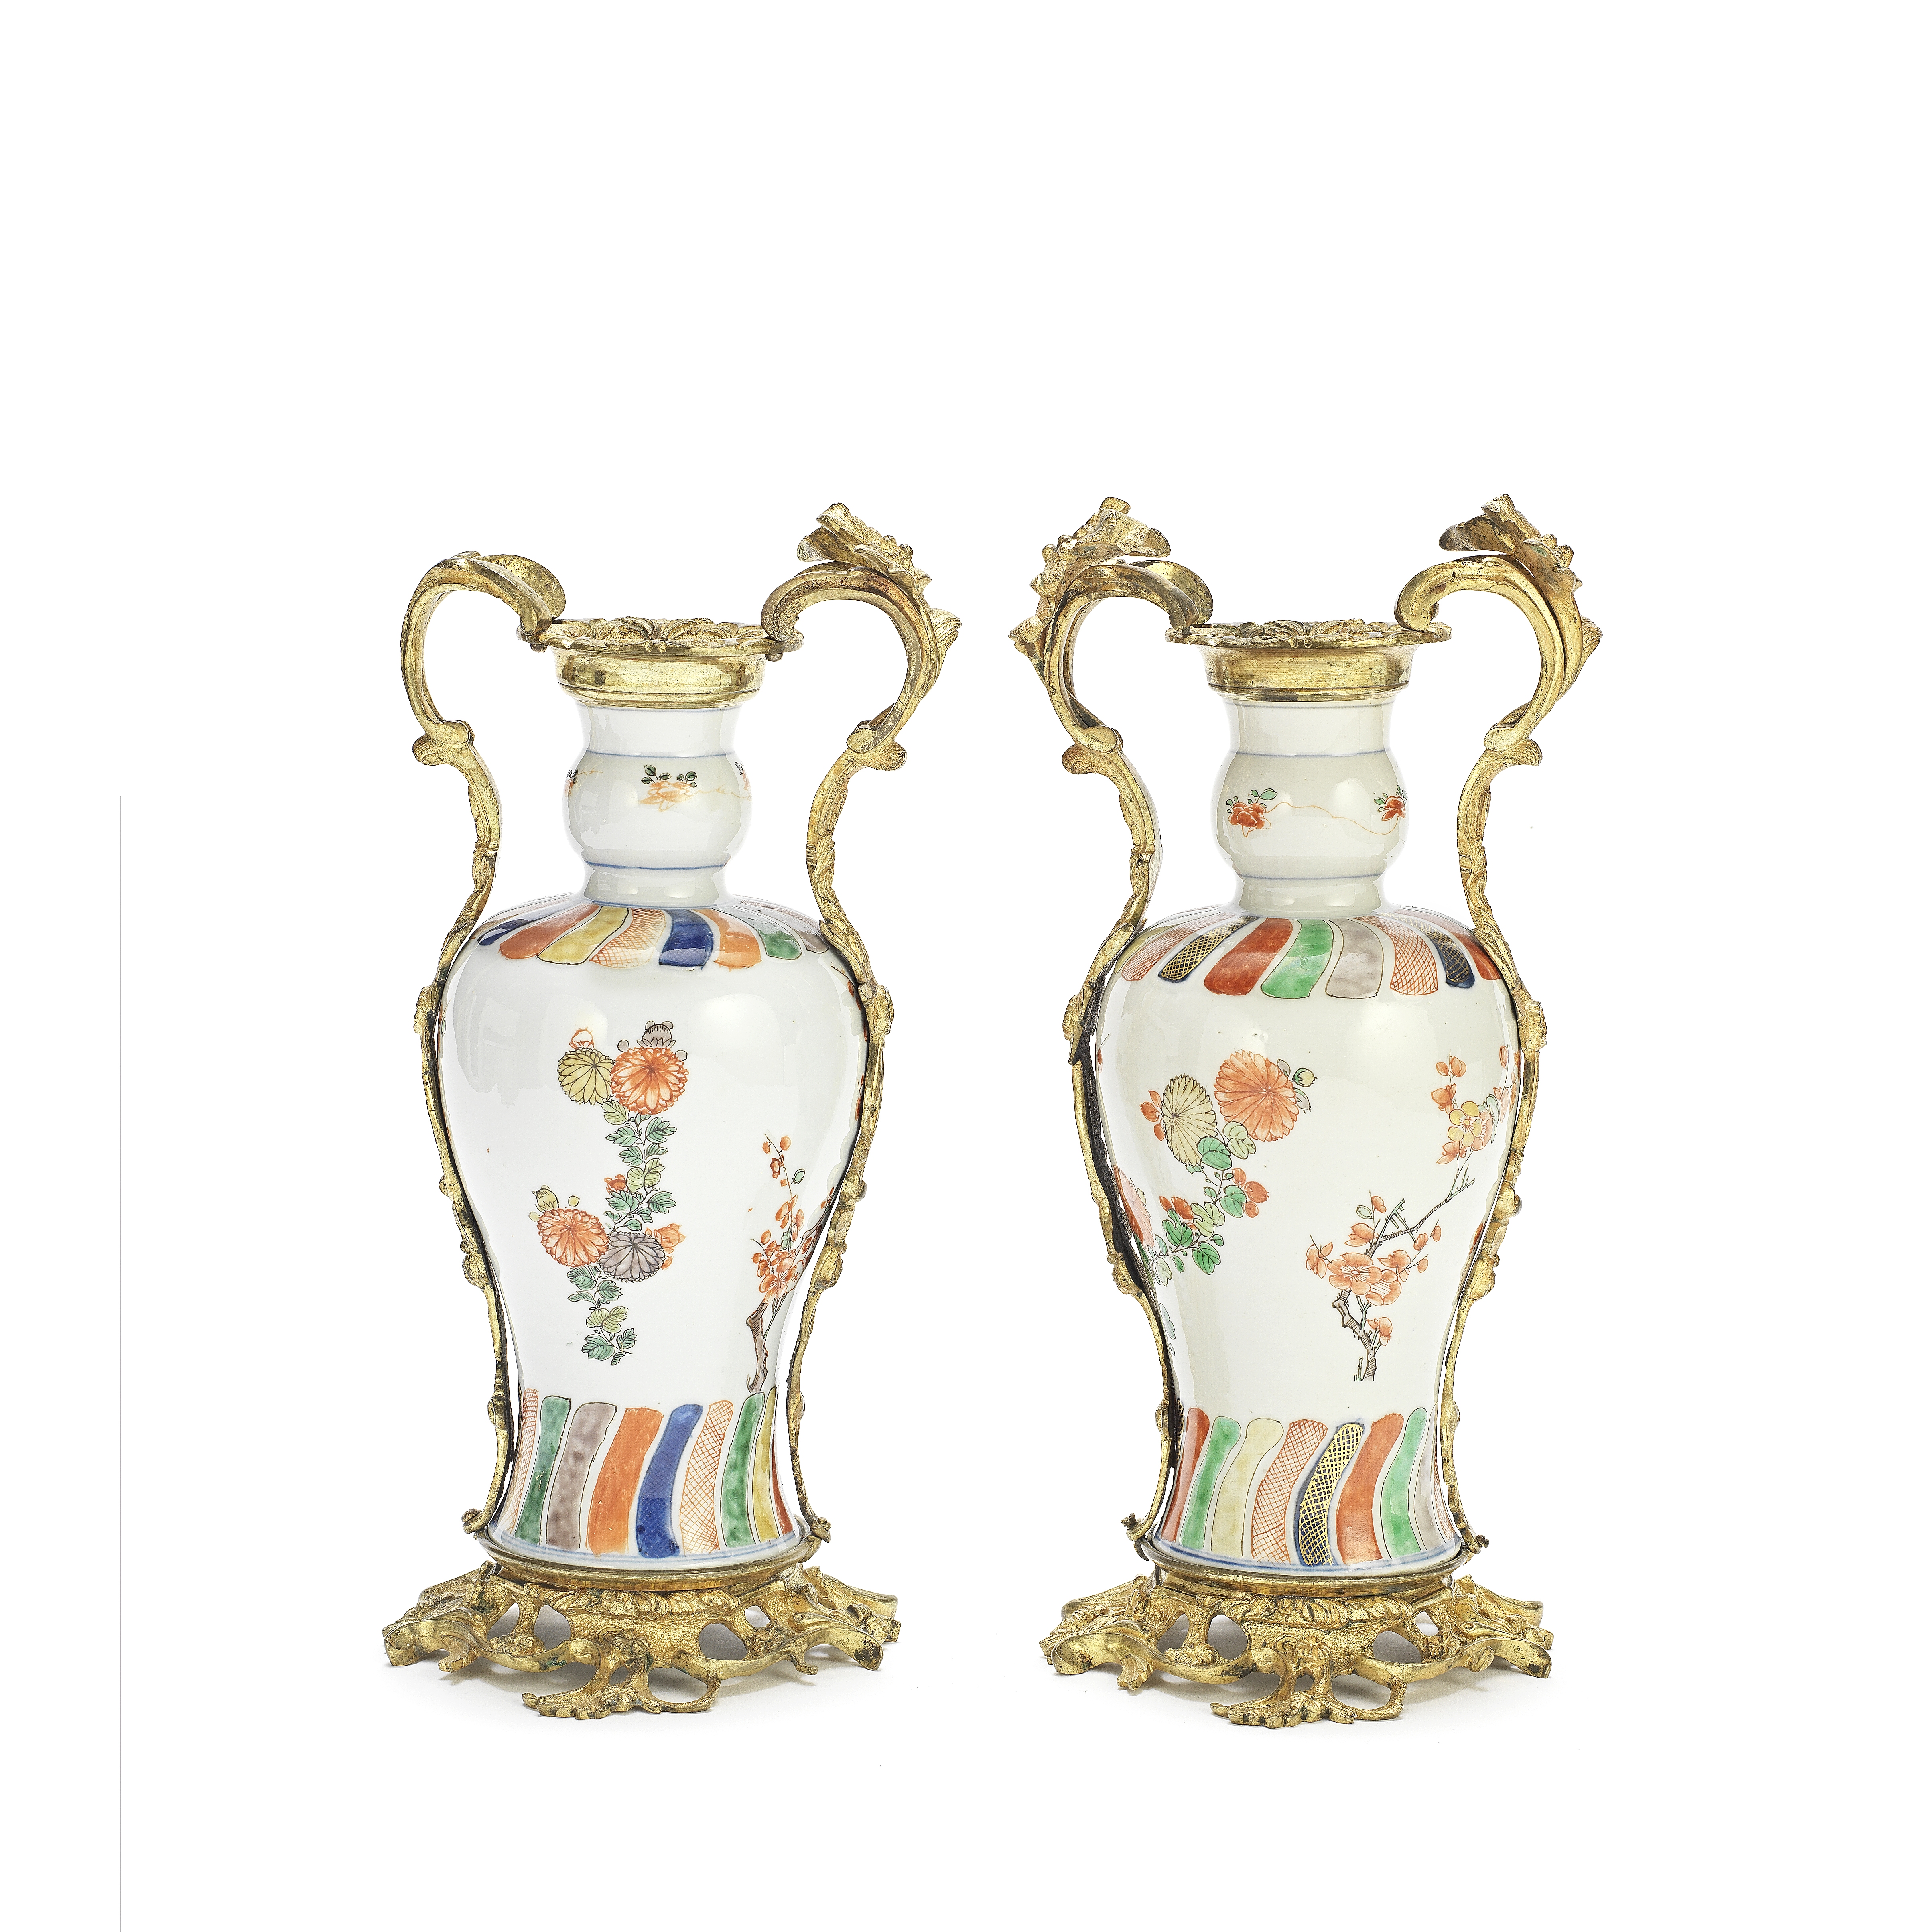 A PAIR OF UNUSUAL UNDERGLAZE BLUE AND ENAMELLED VASES WITH GILT BRONZE ROCOCO-STYLE MOUNTS The po...